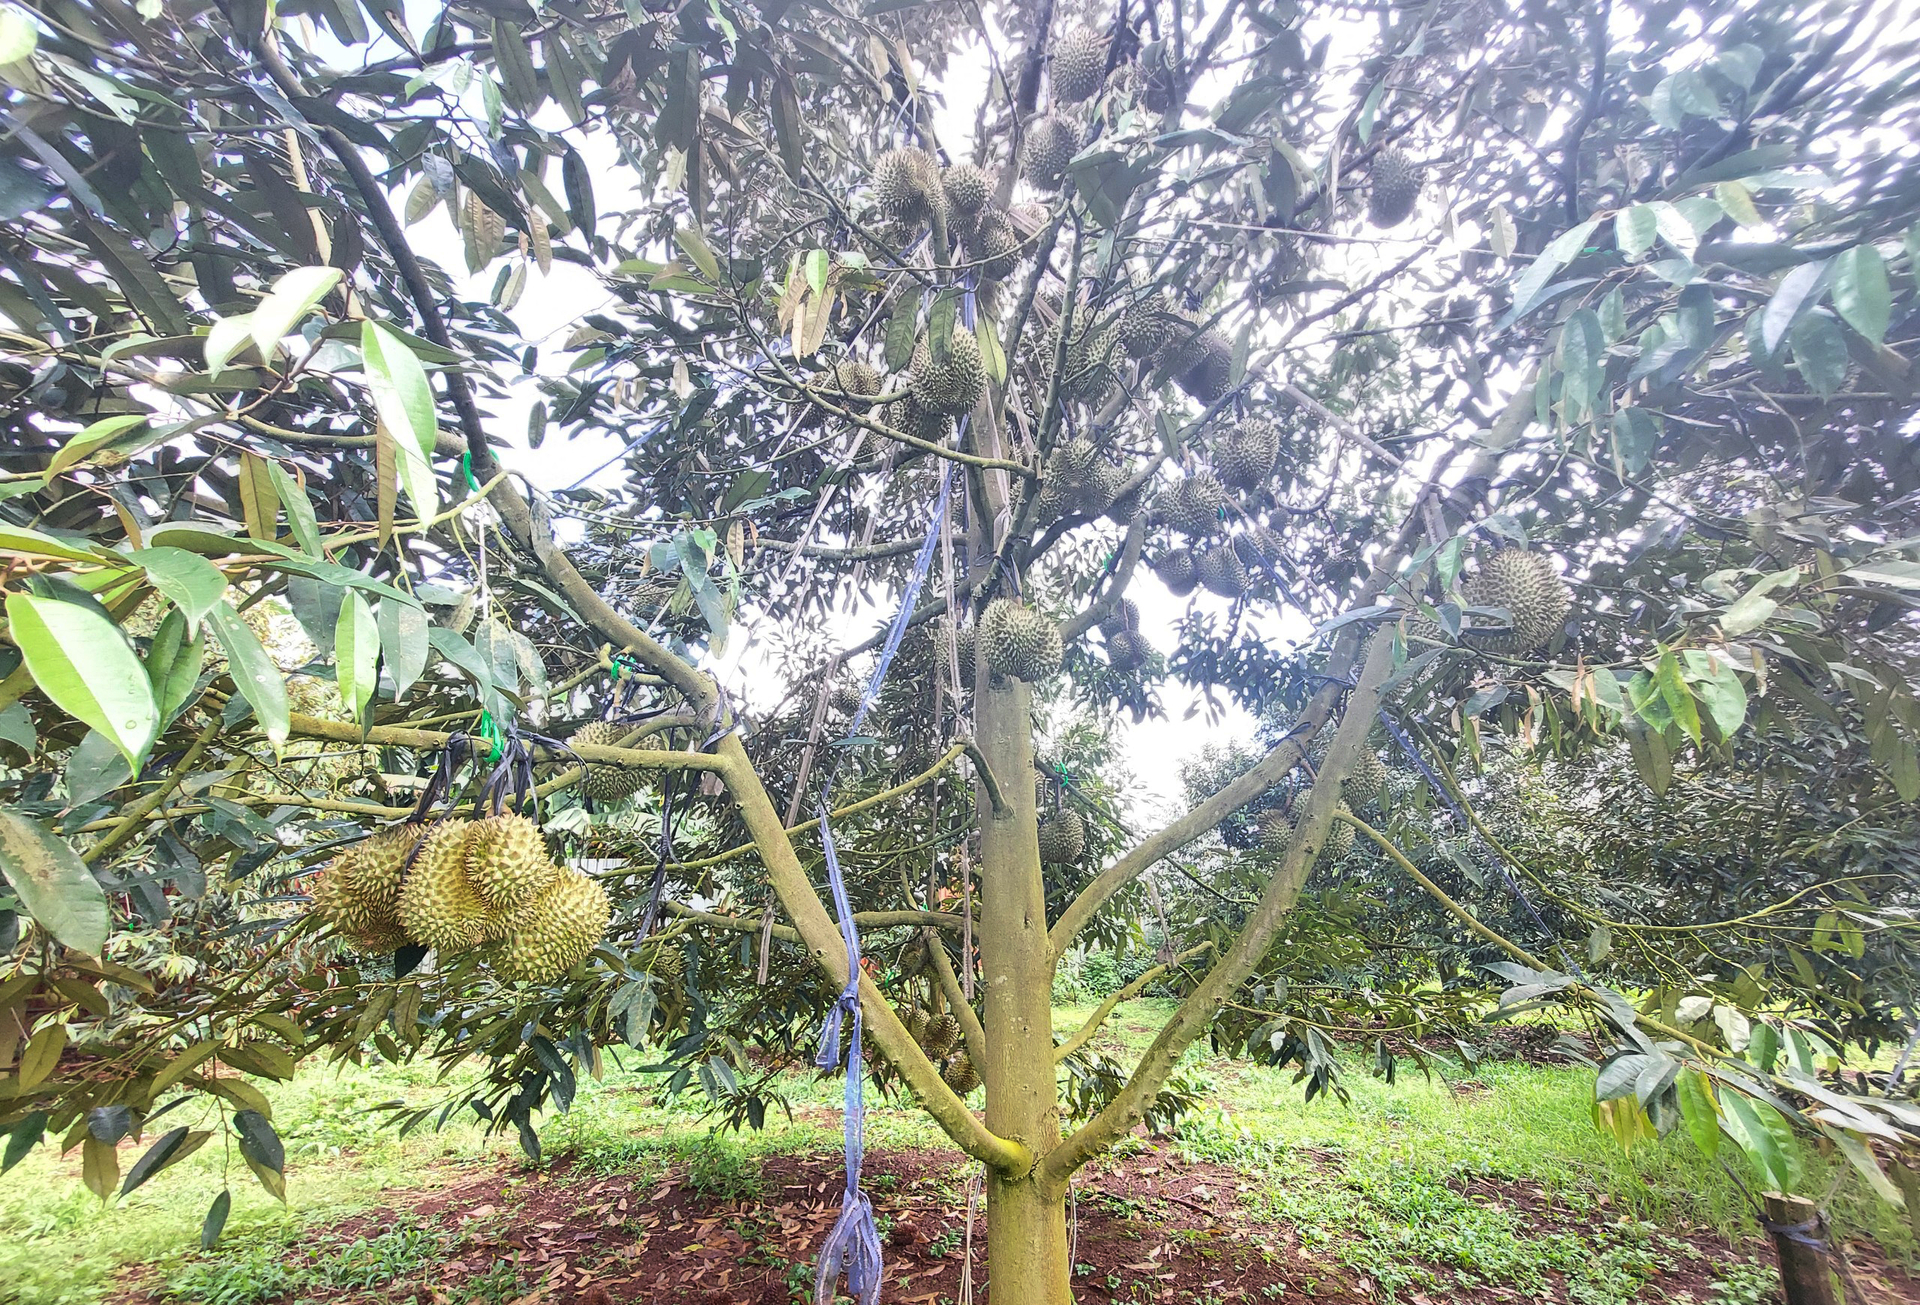 This year's Dak Lak durian ouput is estimated at more than 200,000 tons. Photo: Quang Yen.